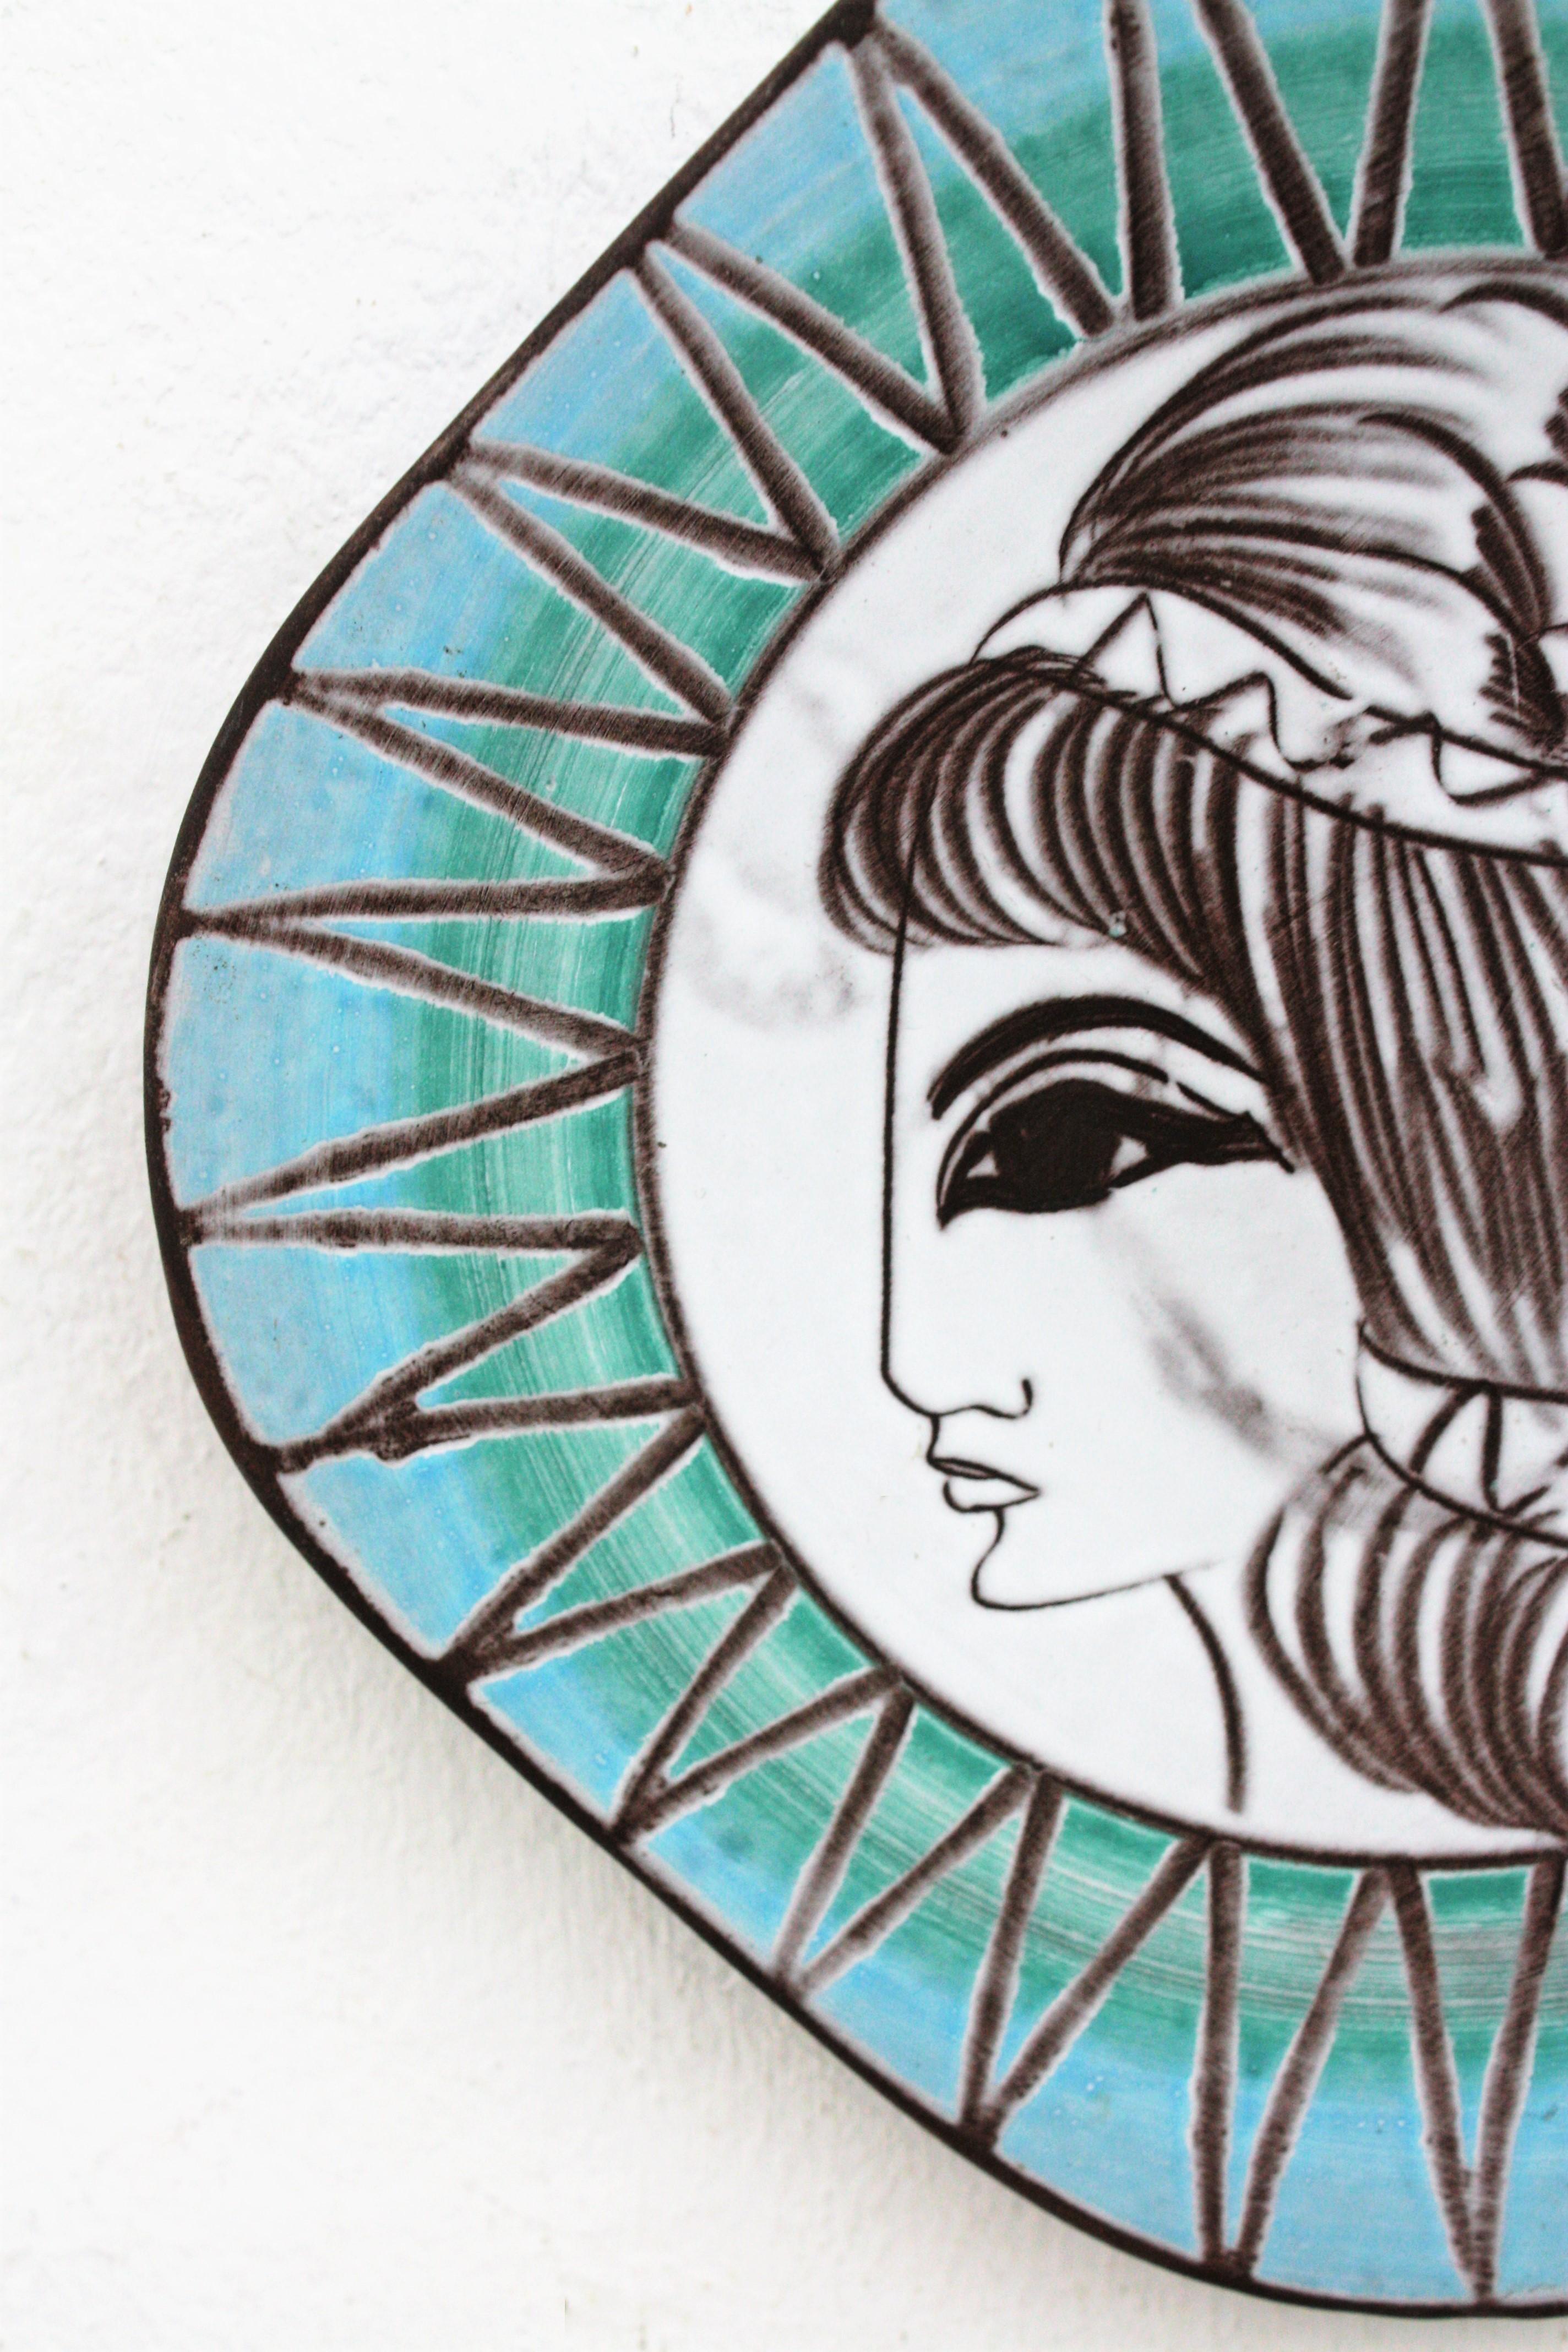 Mid-Century Modern West German Ceramic Wall Plate with Greek Goddess Design, 1950s For Sale